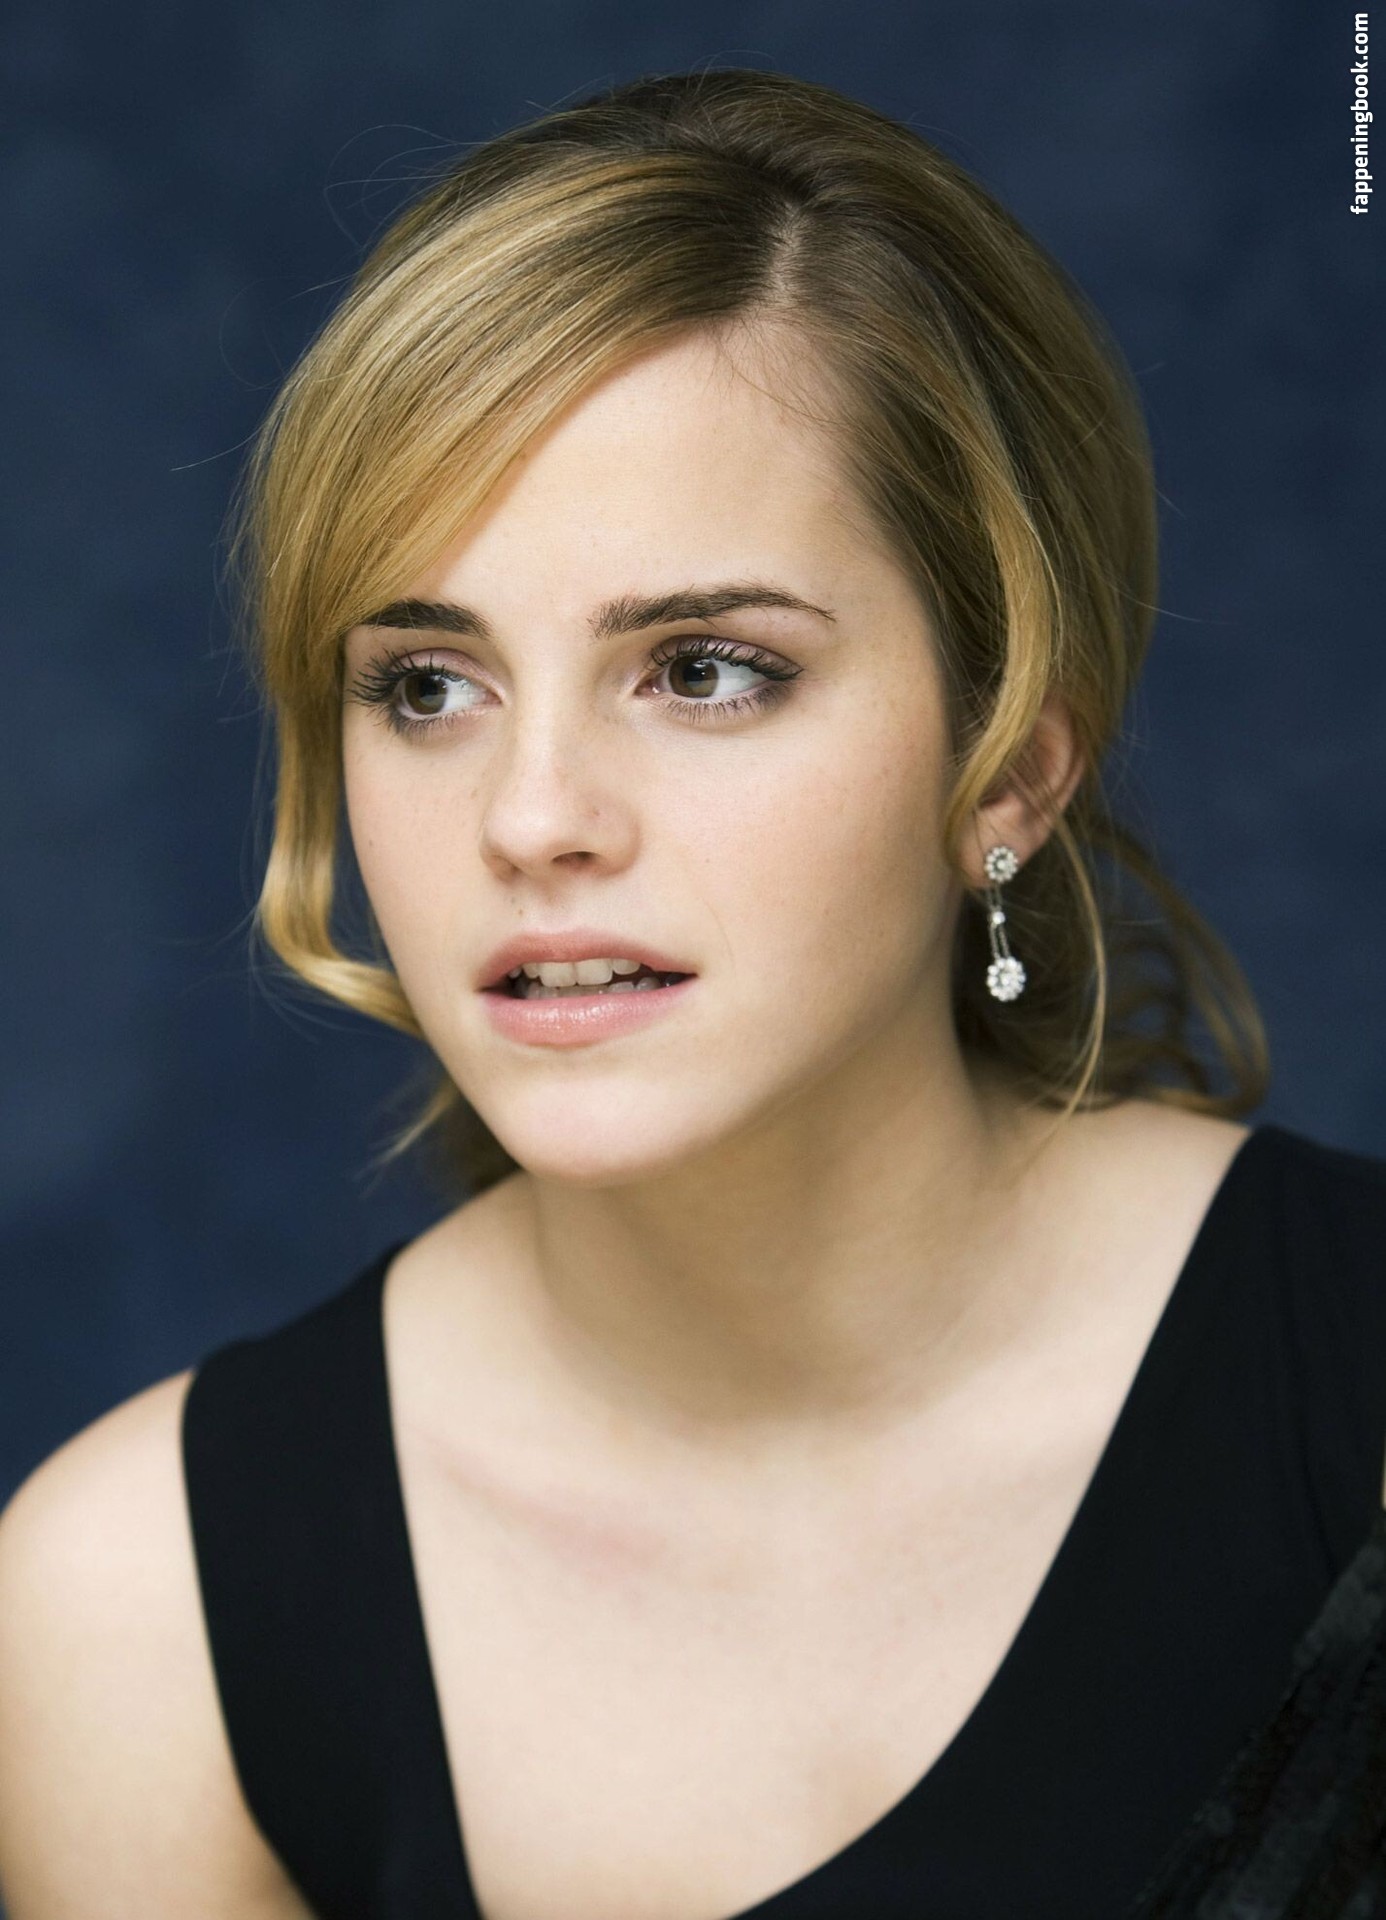 Emma Watson Nude The Fappening Photo FappeningBook